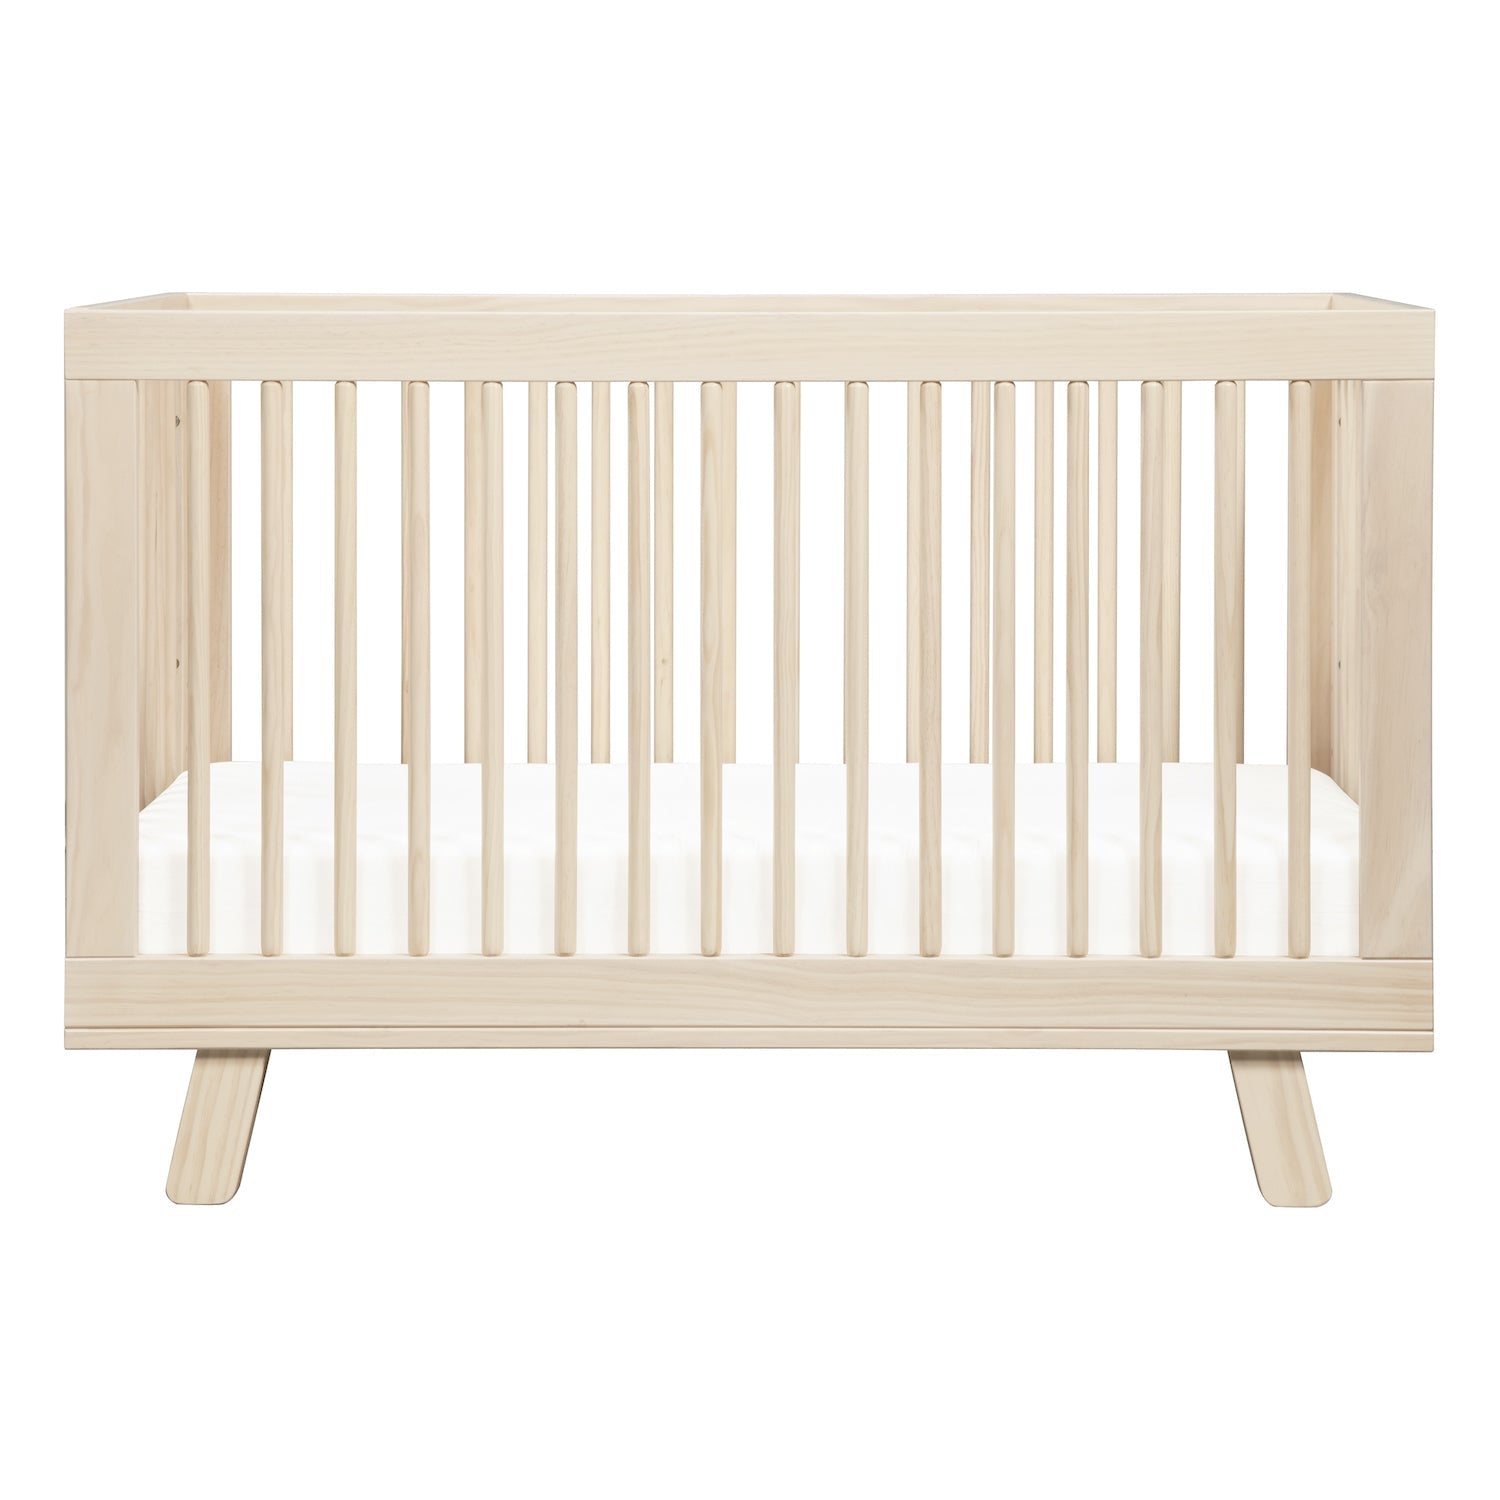 Hudson 3-in-1 Convertible Crib With Toddler Bed Conversion Kit - Washed Natural